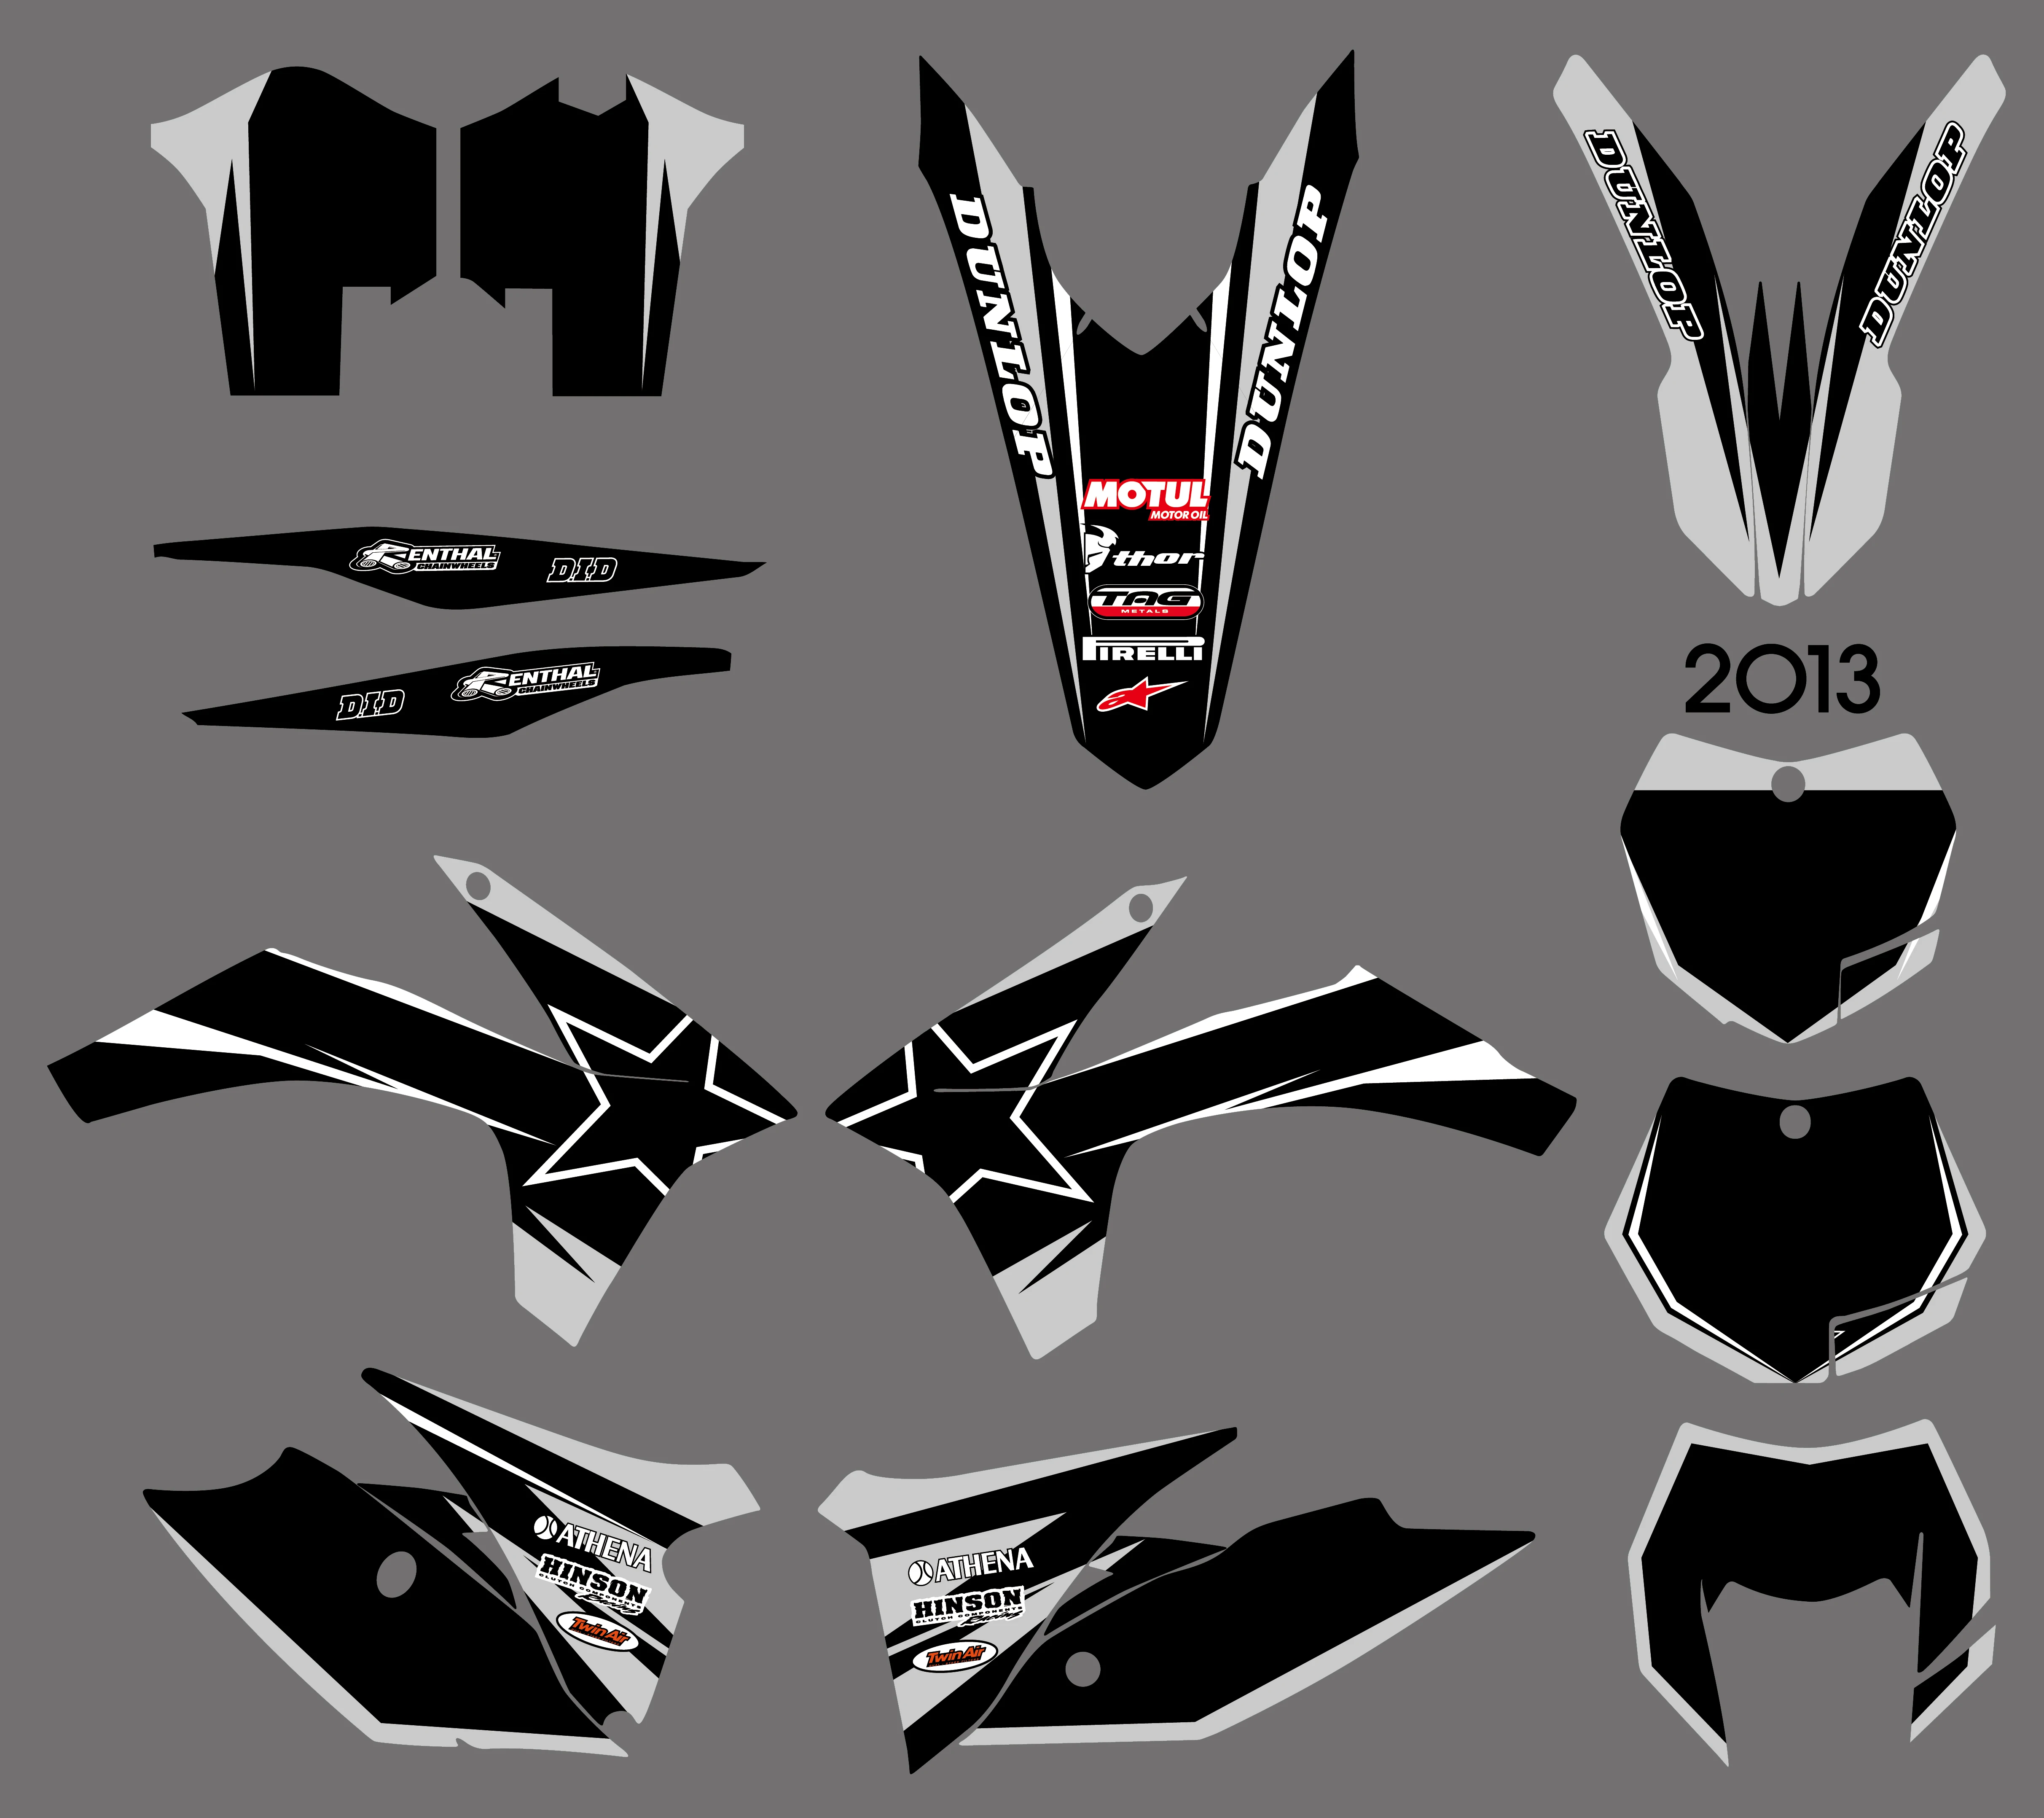 NEW STYLE Team Graphics Decals Stickers For KTM EXC 125 200 250 300 350 450 500 2012-2013 XC All Models 2011